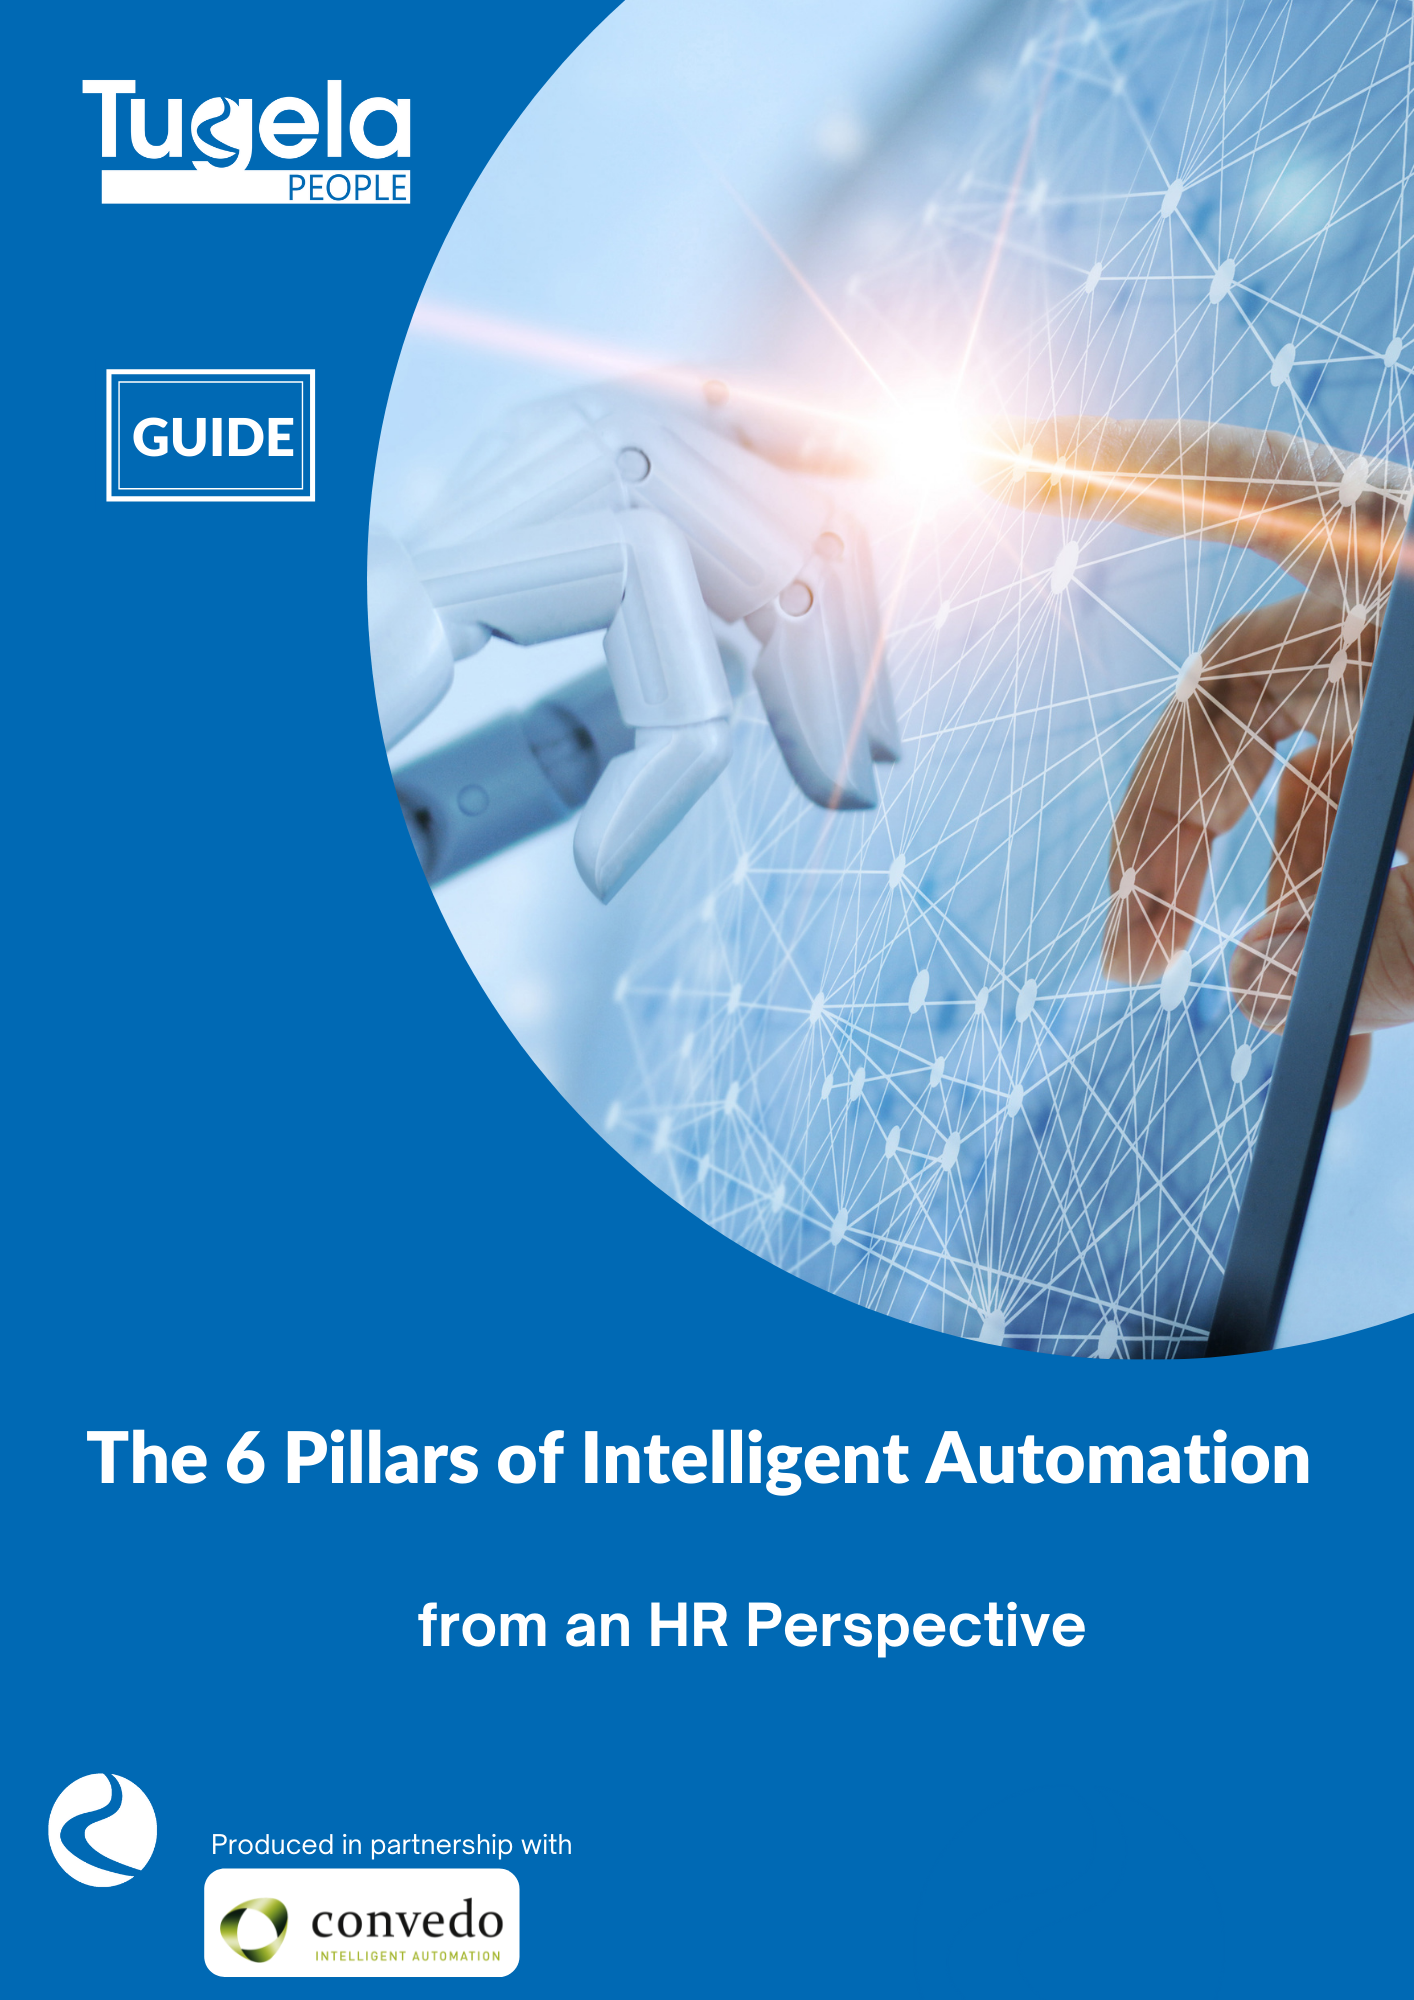 The technology behind HR Automation. Download now